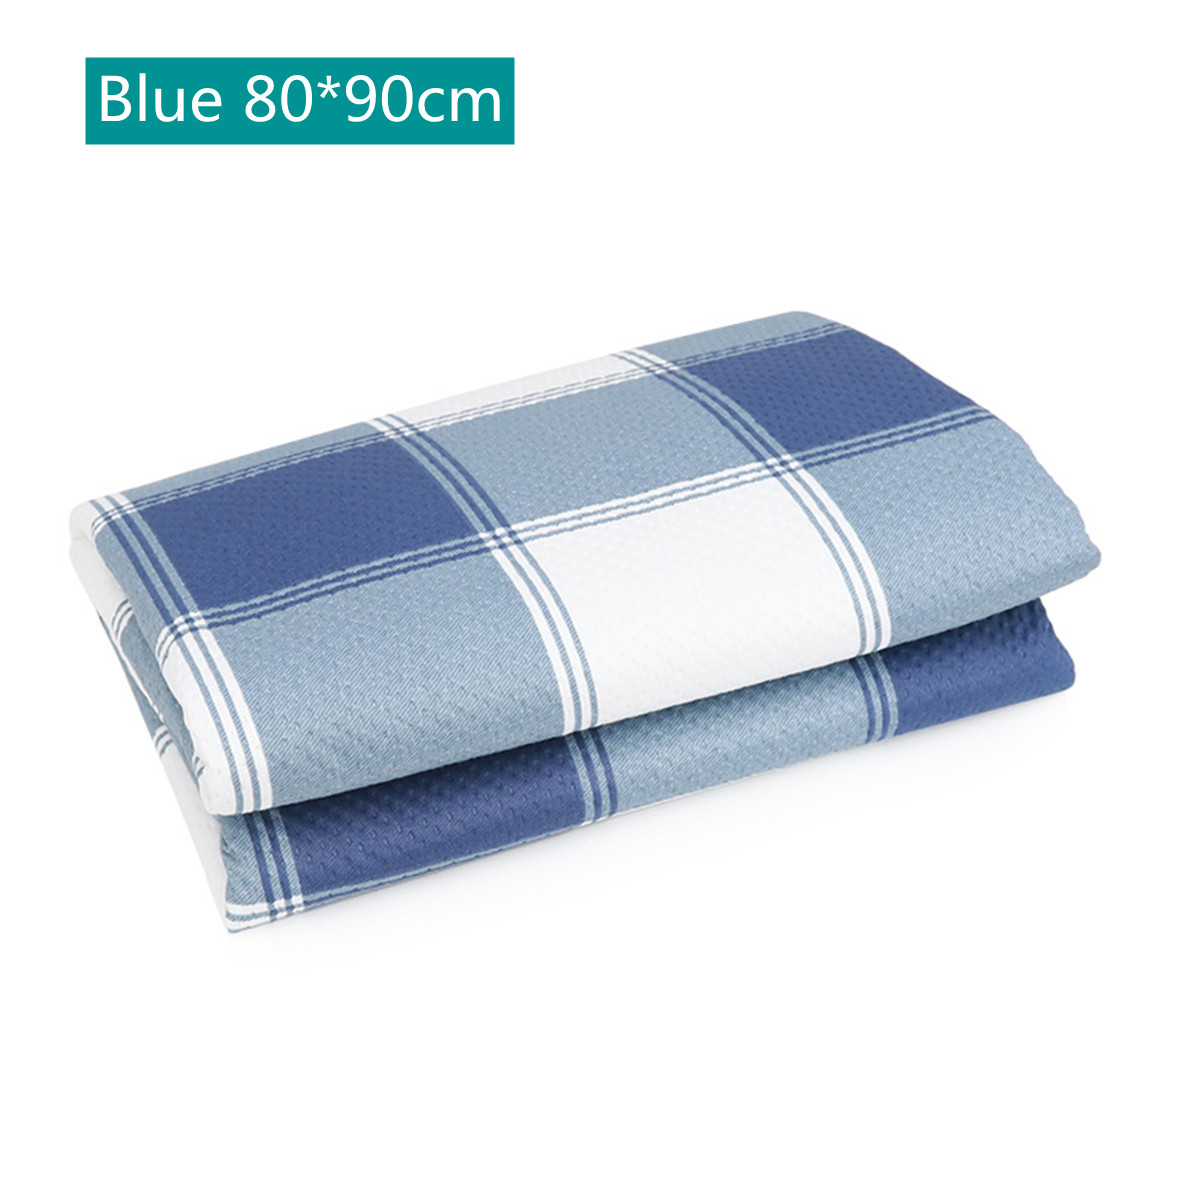 2pcs Waterproof Adult Incontinence Bed Pads For Elderly, Pregnant Women And  Menstrual Period, 60*90cm